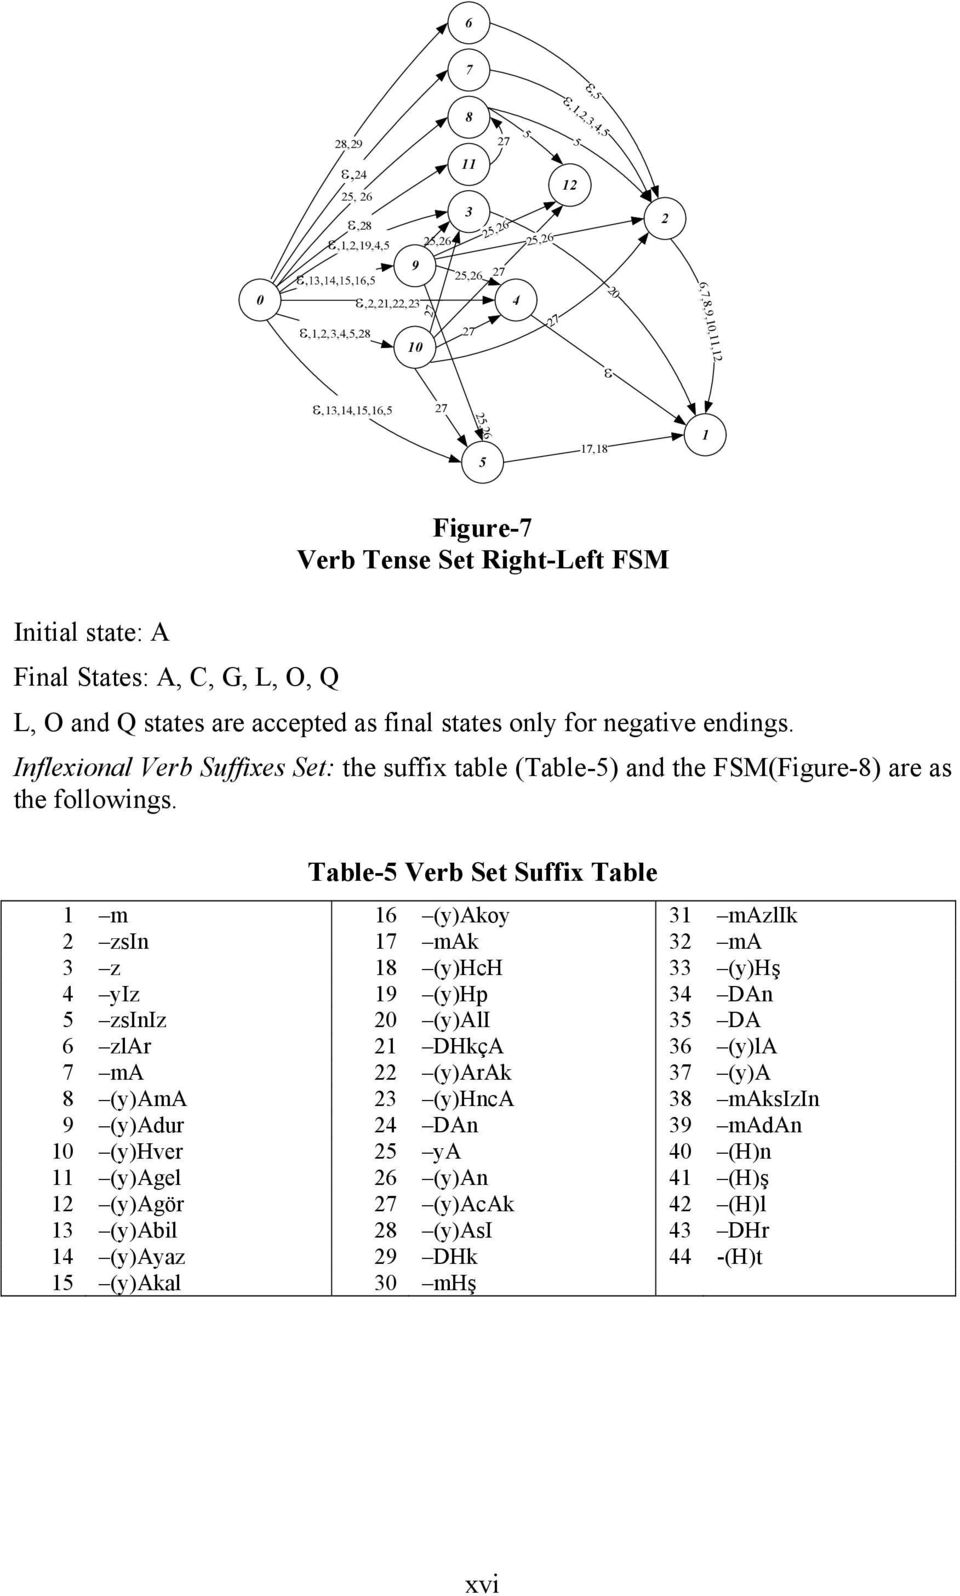 Inflexional Verb Suffixes Set: the suffix table (Table-5) and the FSM(Figure-8) are as the followings.